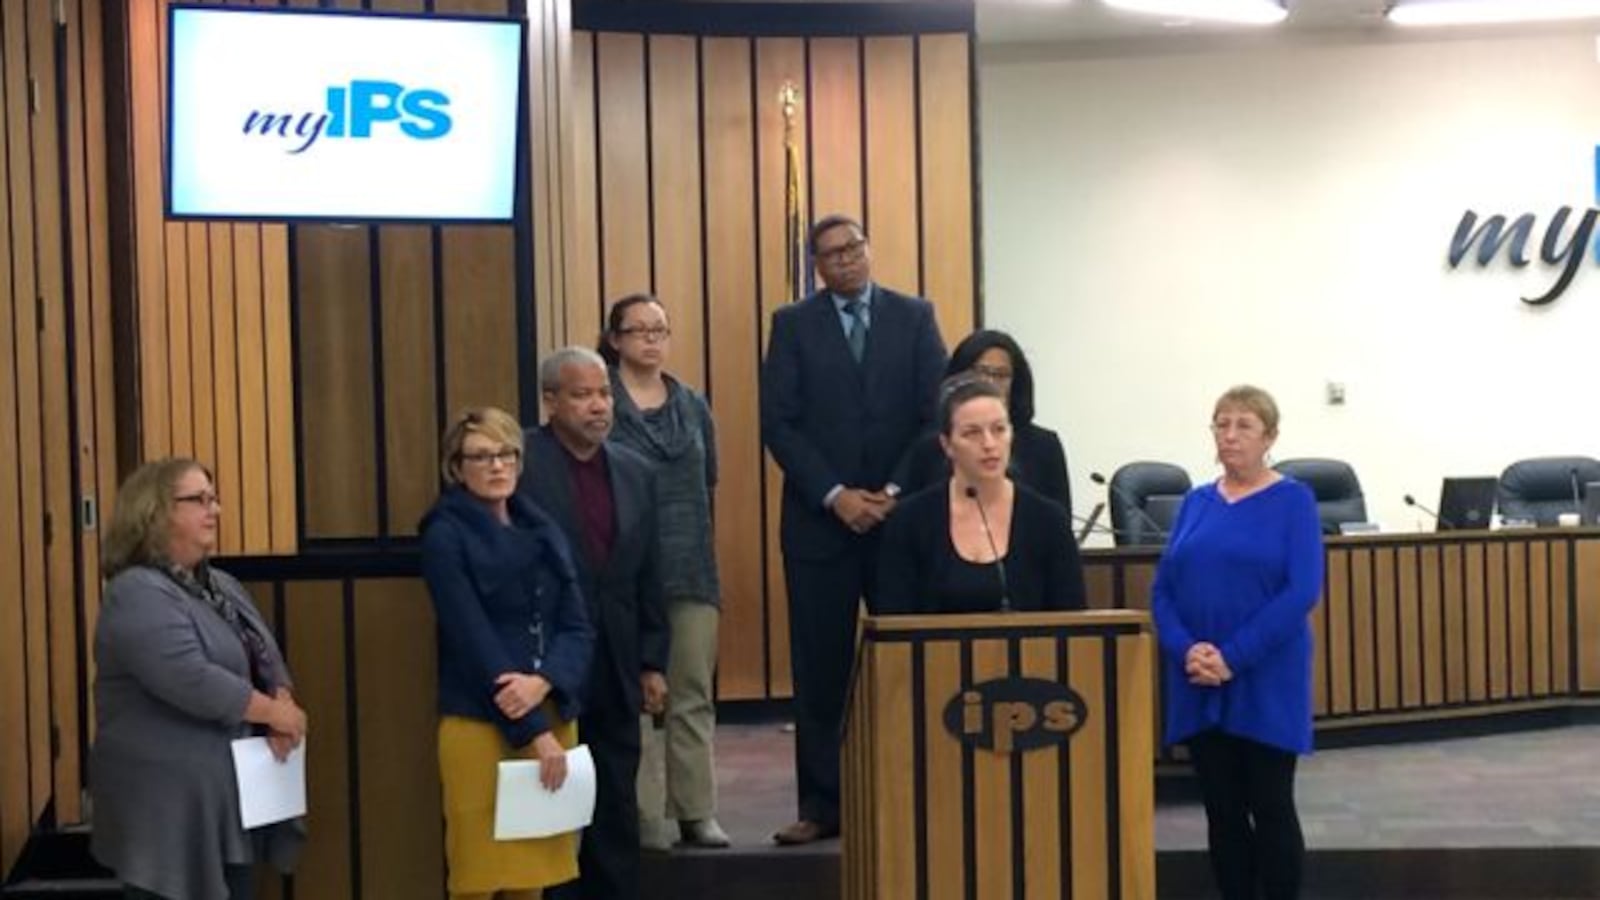 The Indianapolis Public School Board held a press conference tonight to announce new "core beliefs."